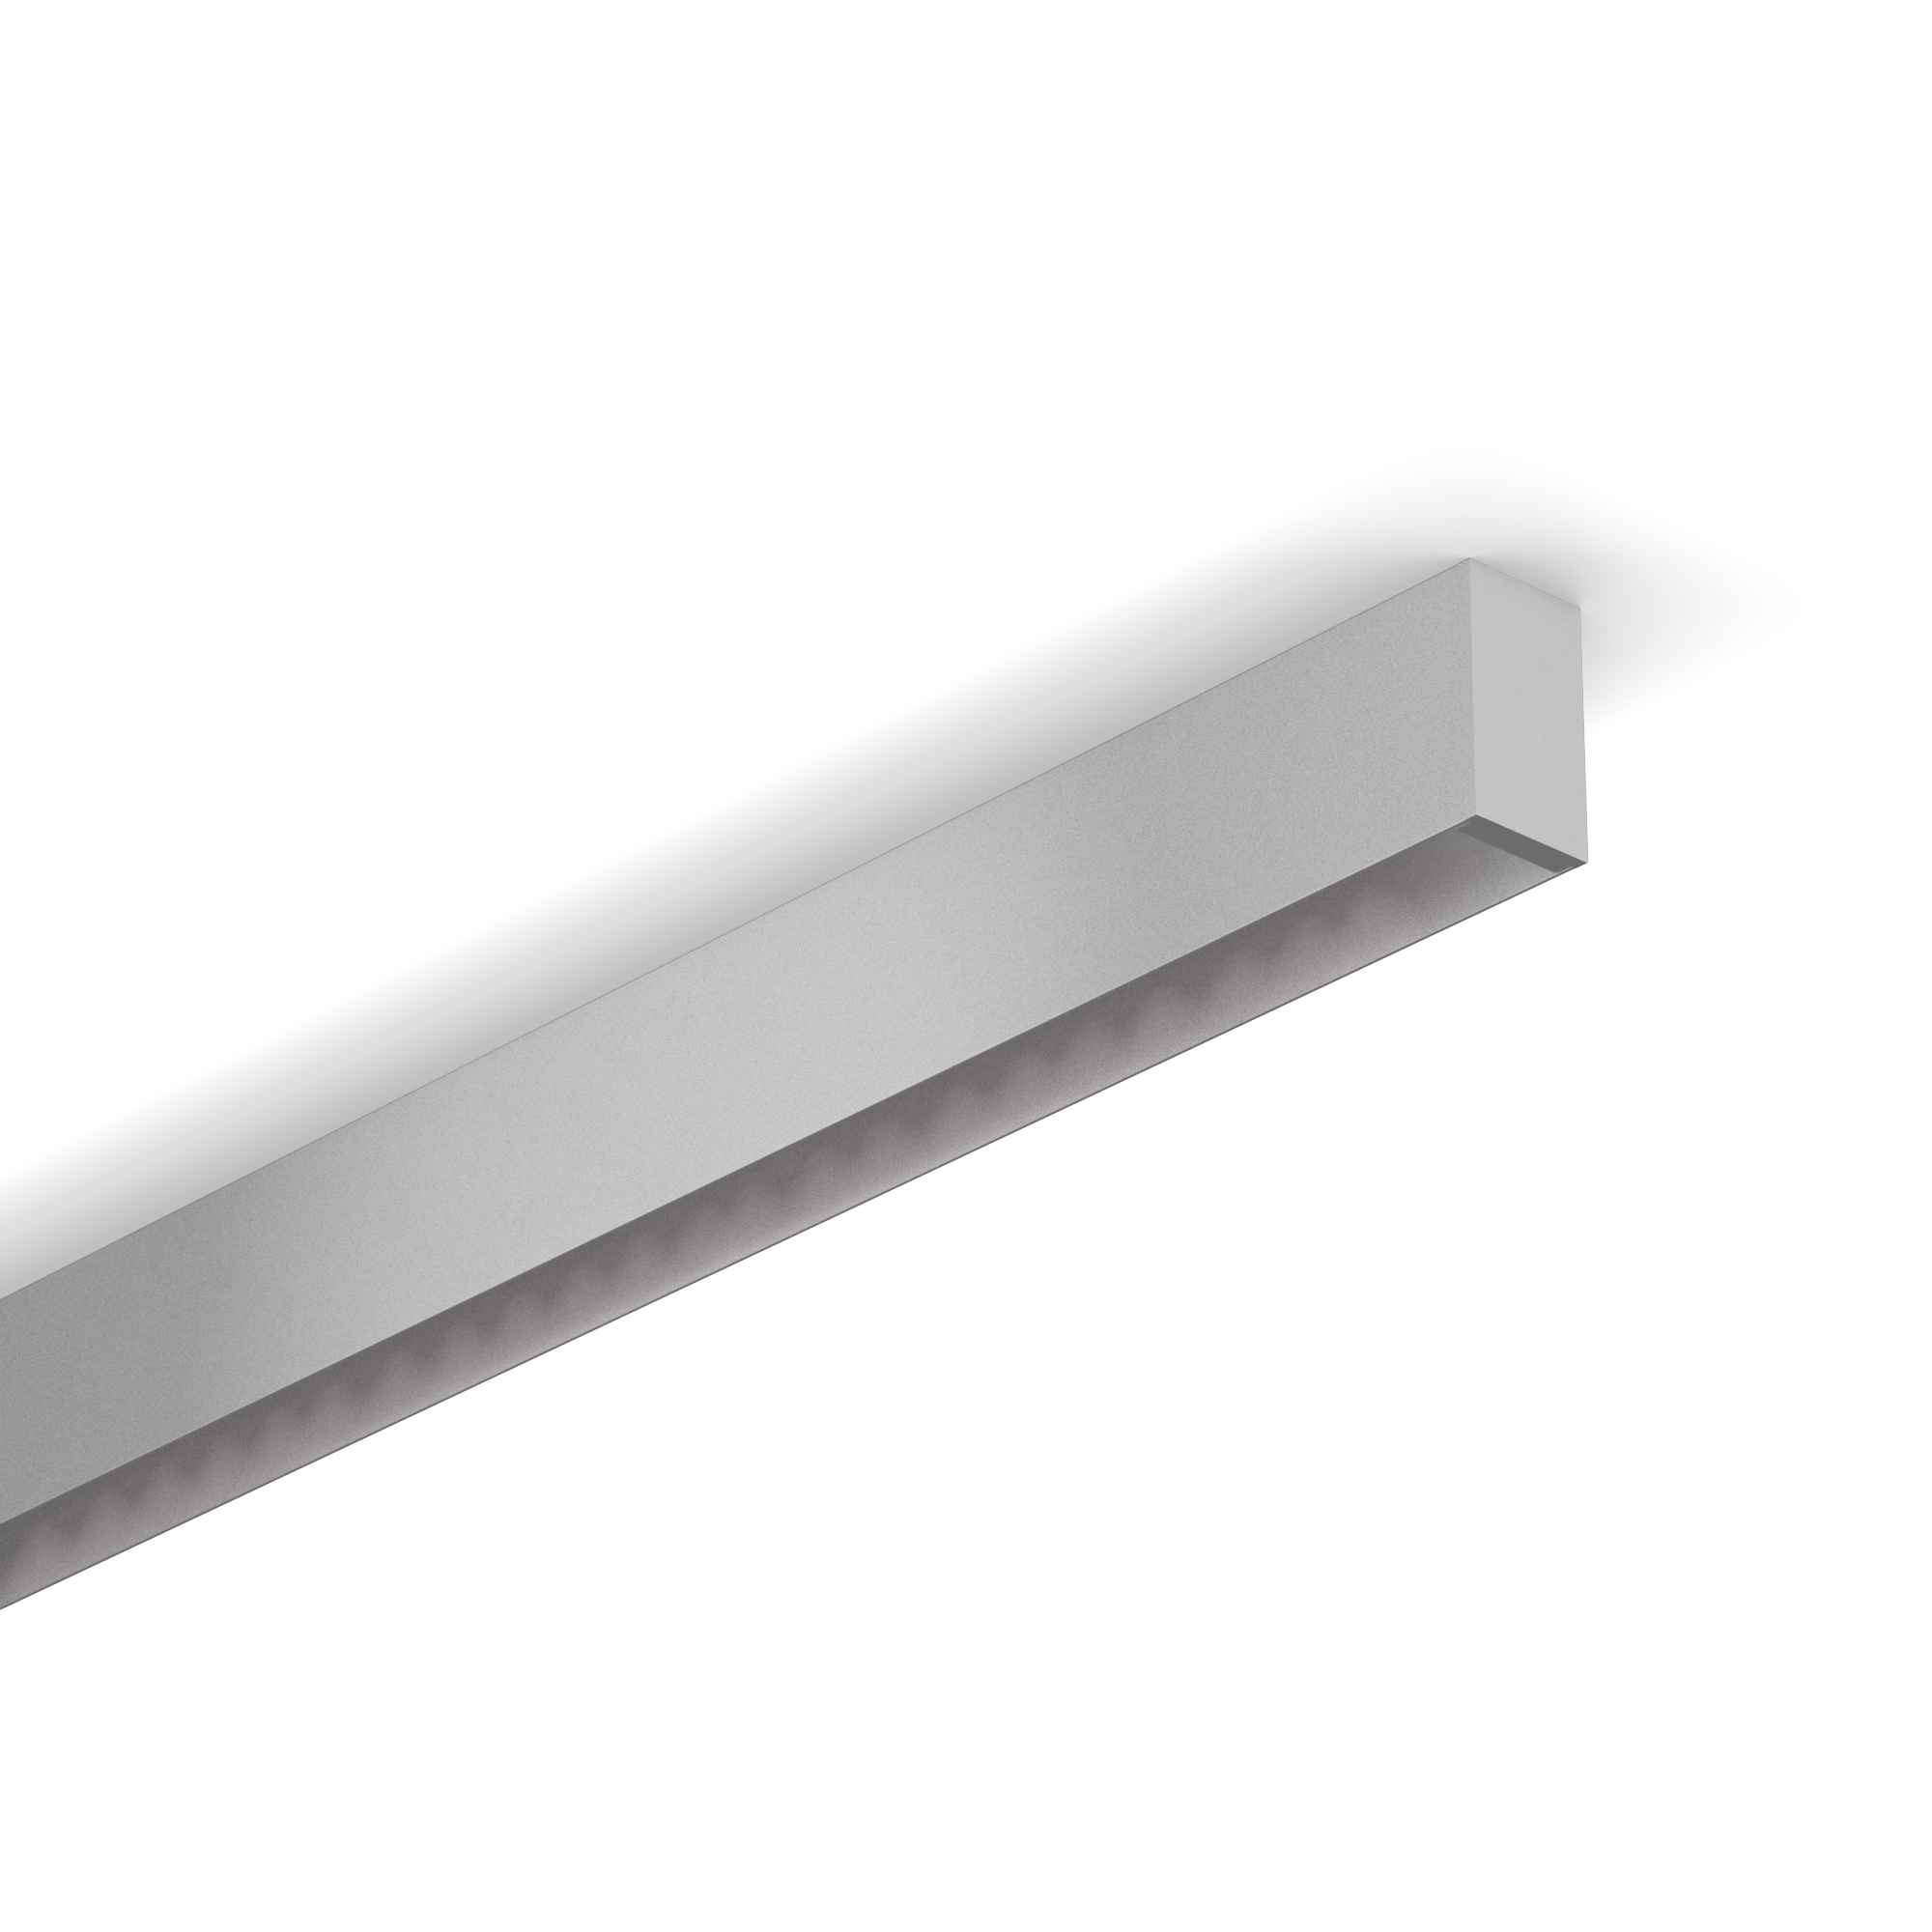 0.95” Ultra-Compact LED Linear
NANOBeam is 0.95” wide, bringing regressed SmartBeam® capabilities to a surface-mounted form factor that complements architectural space. NANOBeam features a remote driver to remove visual bulk. Optional Individual lenses and parabolic reflectors are located below each LED using Nano-Cavity Optics (NCO). For greater comfort, the regulated beam lowers glare and adjusts the light output. These concentrated distributions are ideal for a wide range of task-specific requirements. At cut-off, NCO has a softer appearance, a larger beam spread, and a gradual brightness transition.

 

Beam profile: 0.95” (24mm) x 1.73” (44mm)